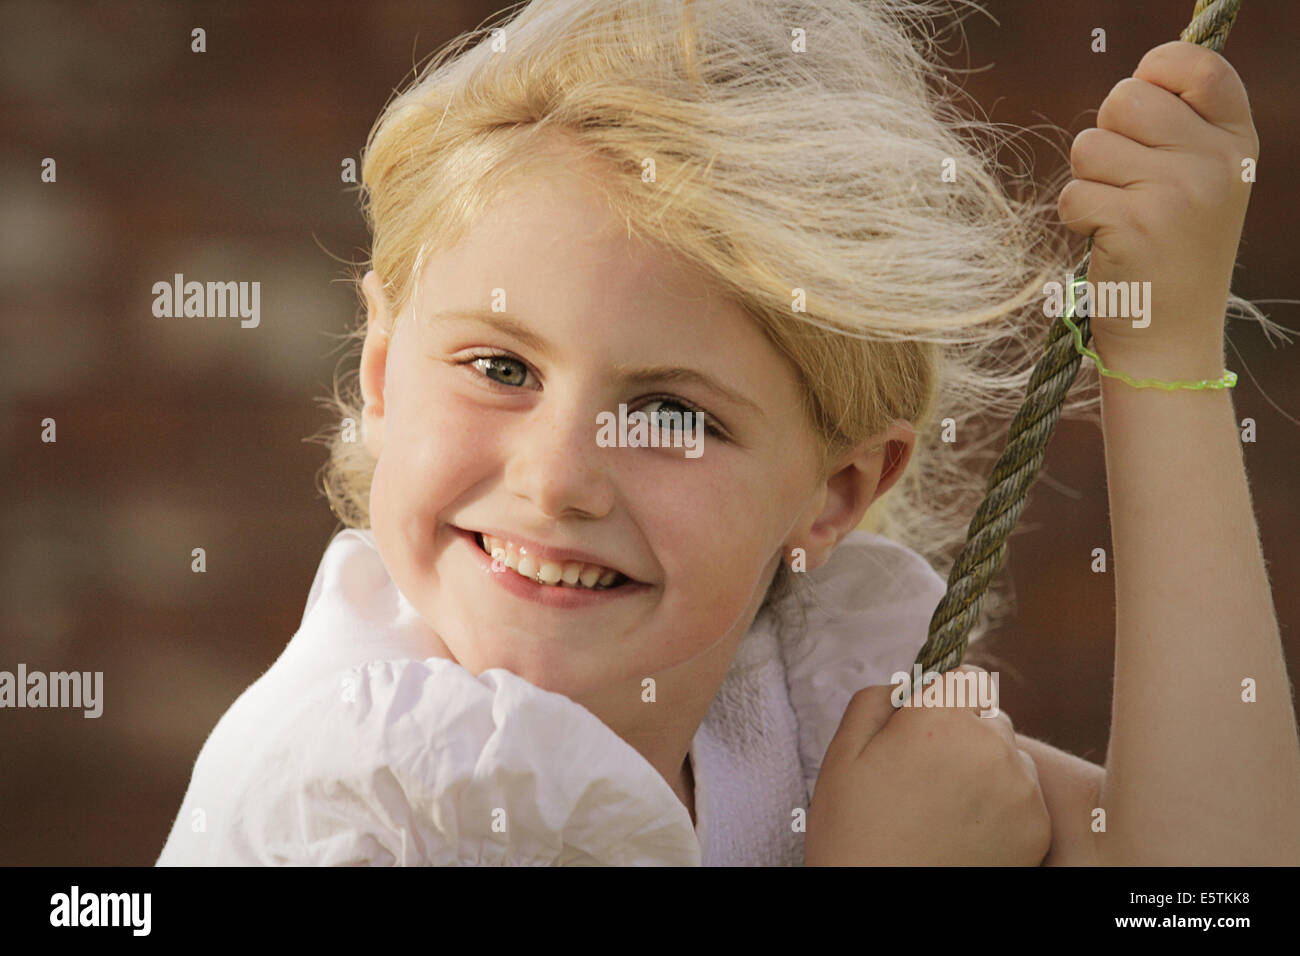 Pretty blond girl on a swing Stock Photo